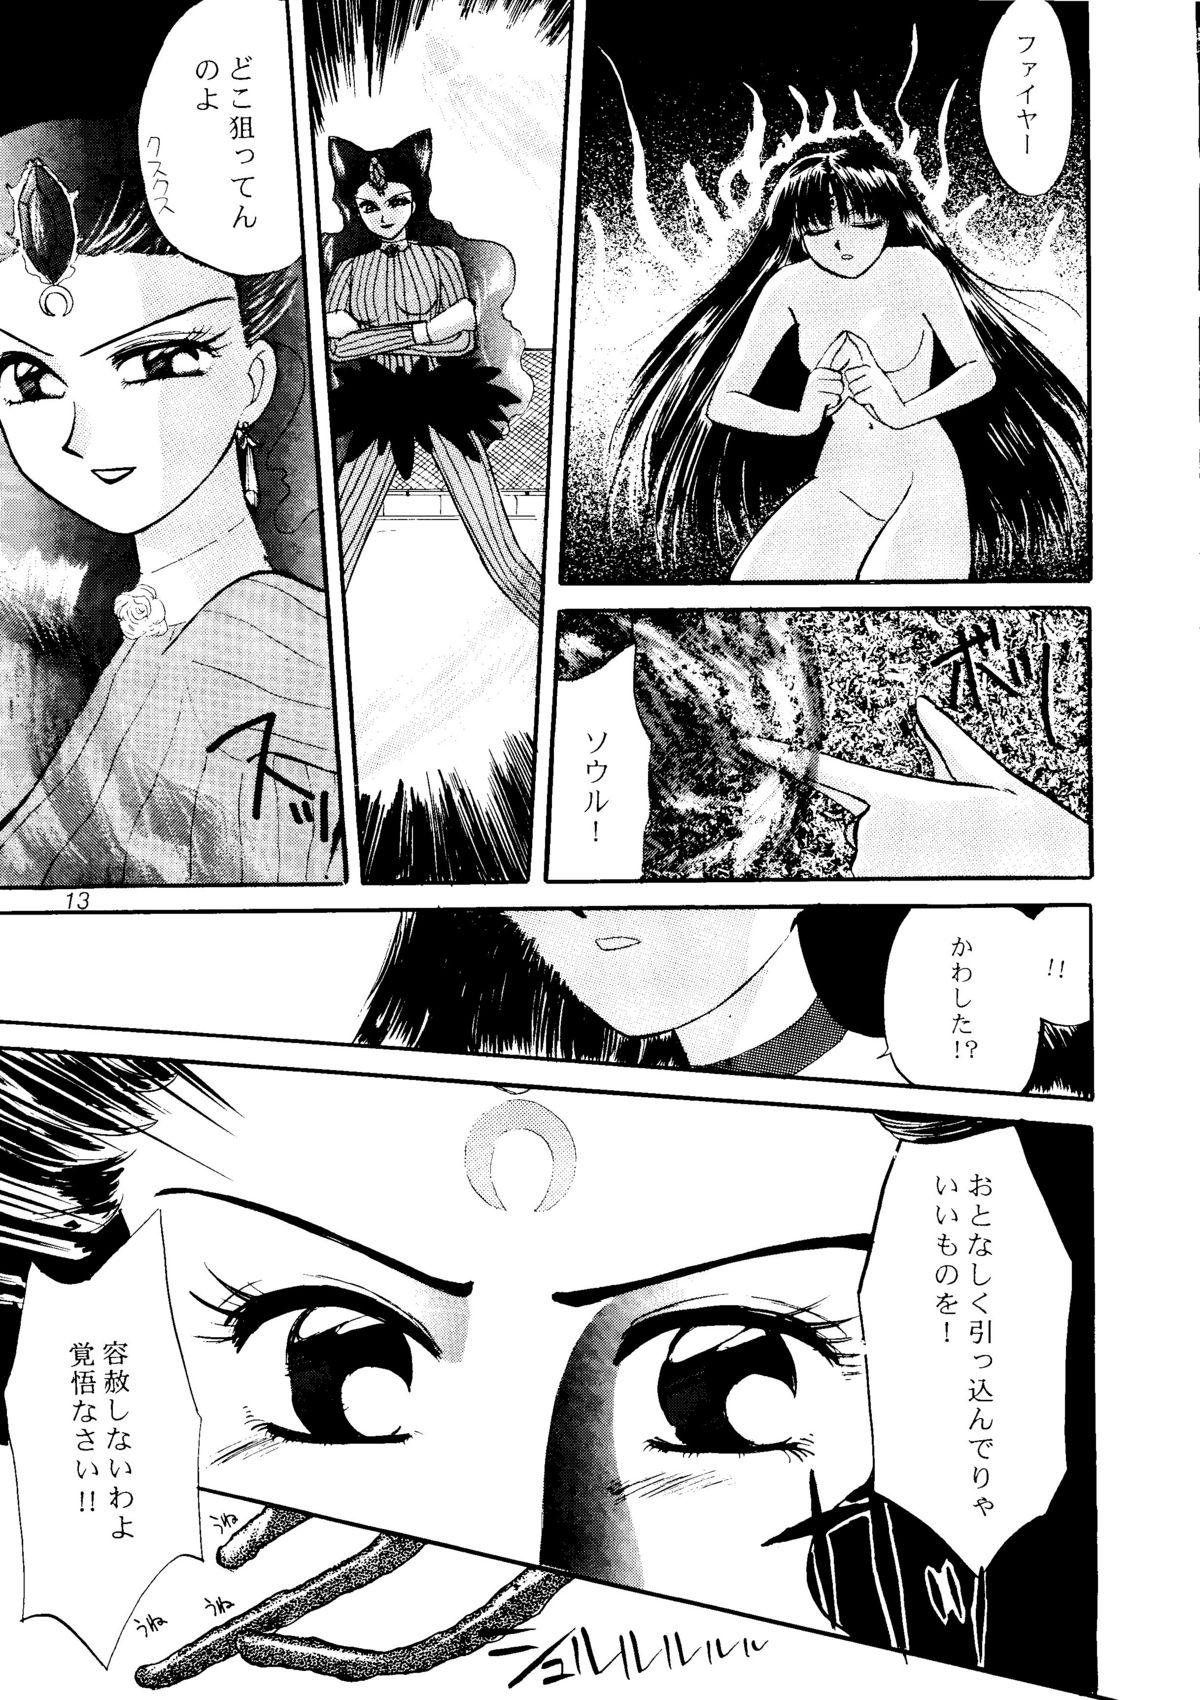 Transsexual Gekkou - Sailor moon Young - Page 11